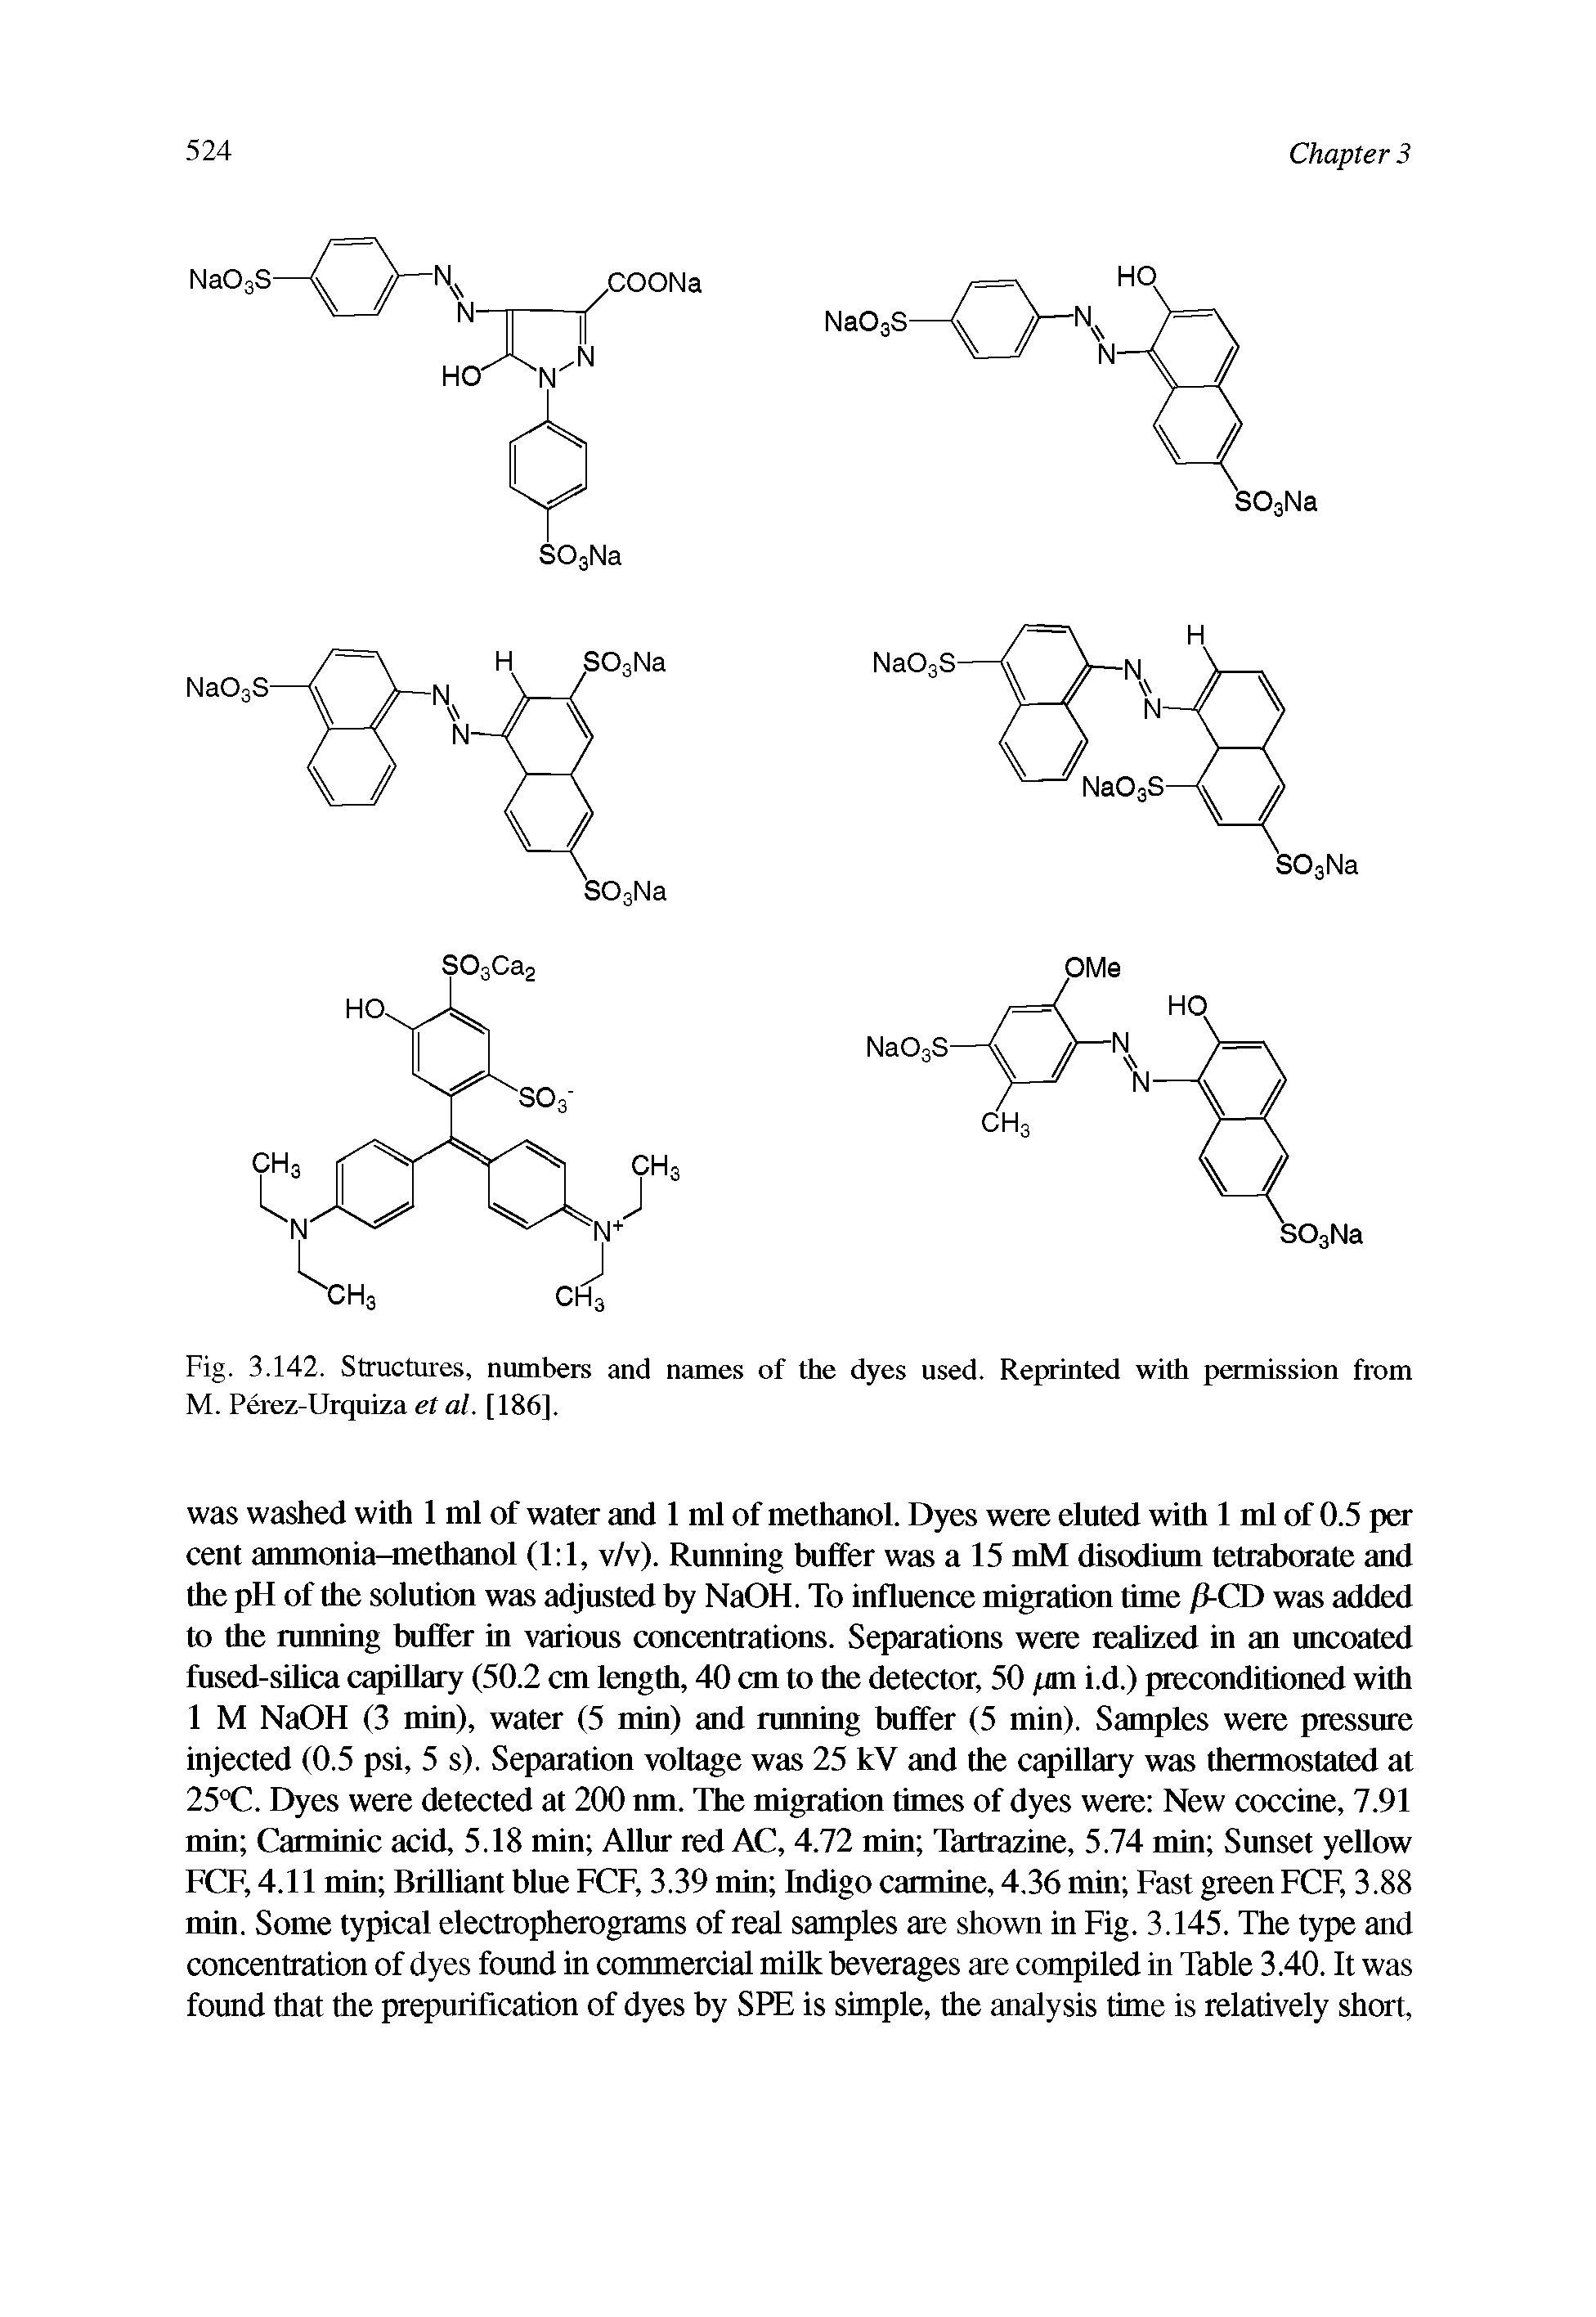 Fig. 3.142. Structures, numbers and names of the dyes used. Reprinted with permission from M. Perez-Urquiza el al. [186],...